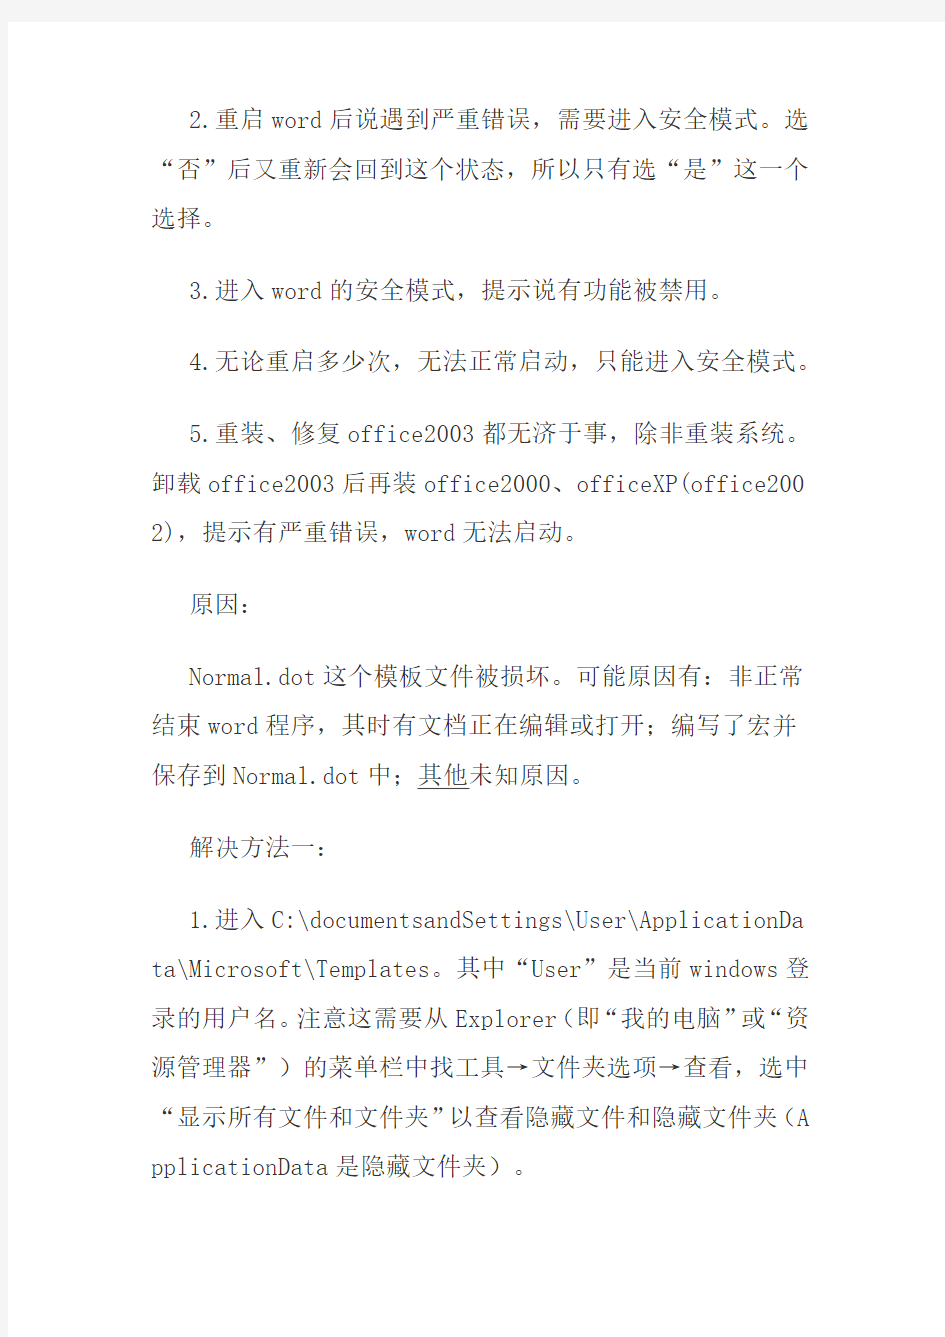 word打不开_发送错误报告解决办法